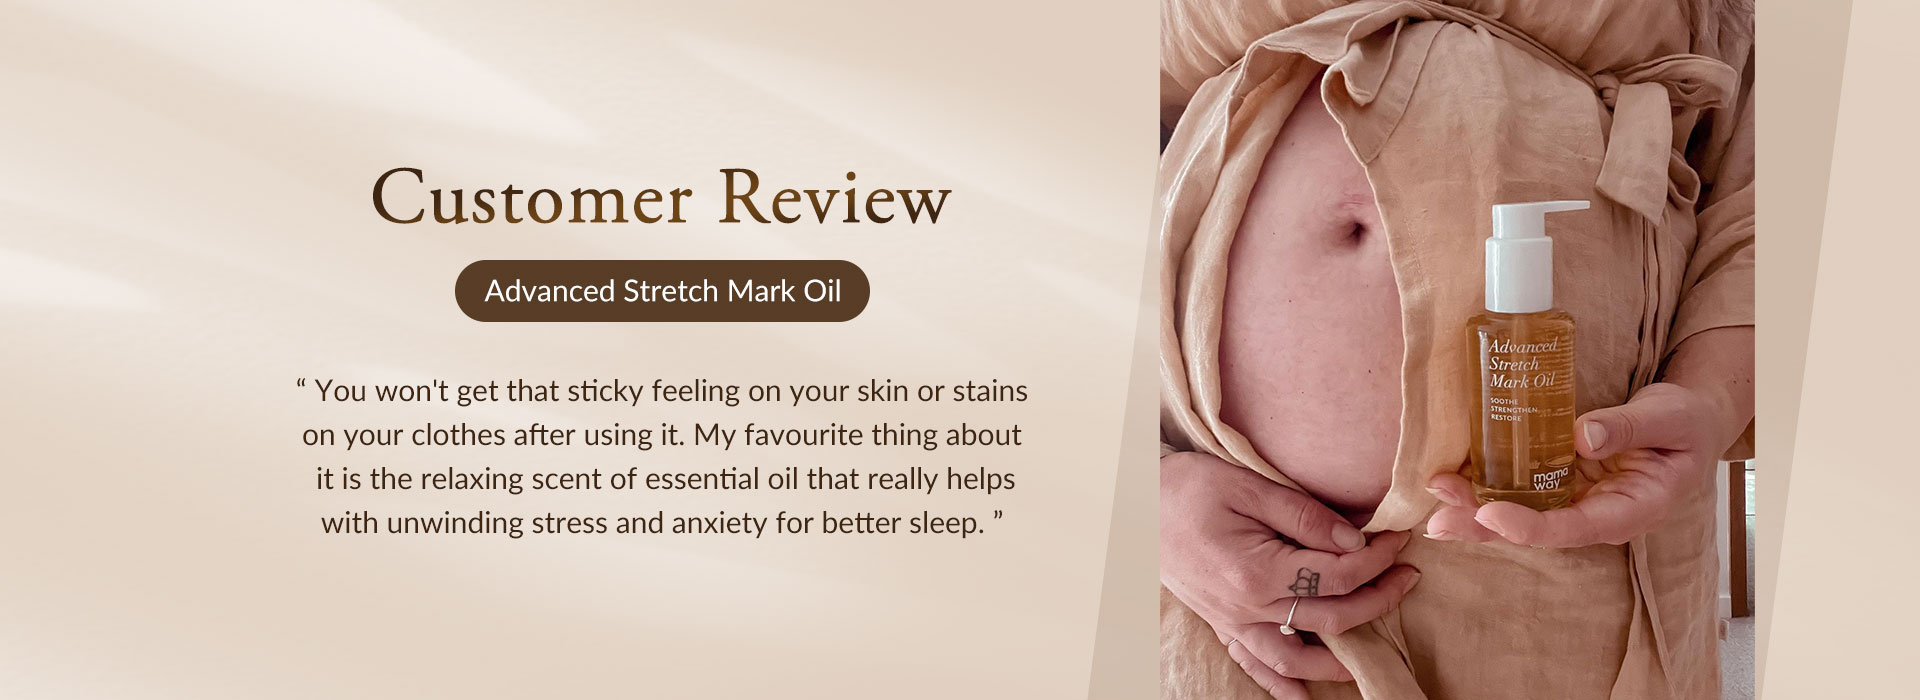 Stretch Mark Oil Customer Review